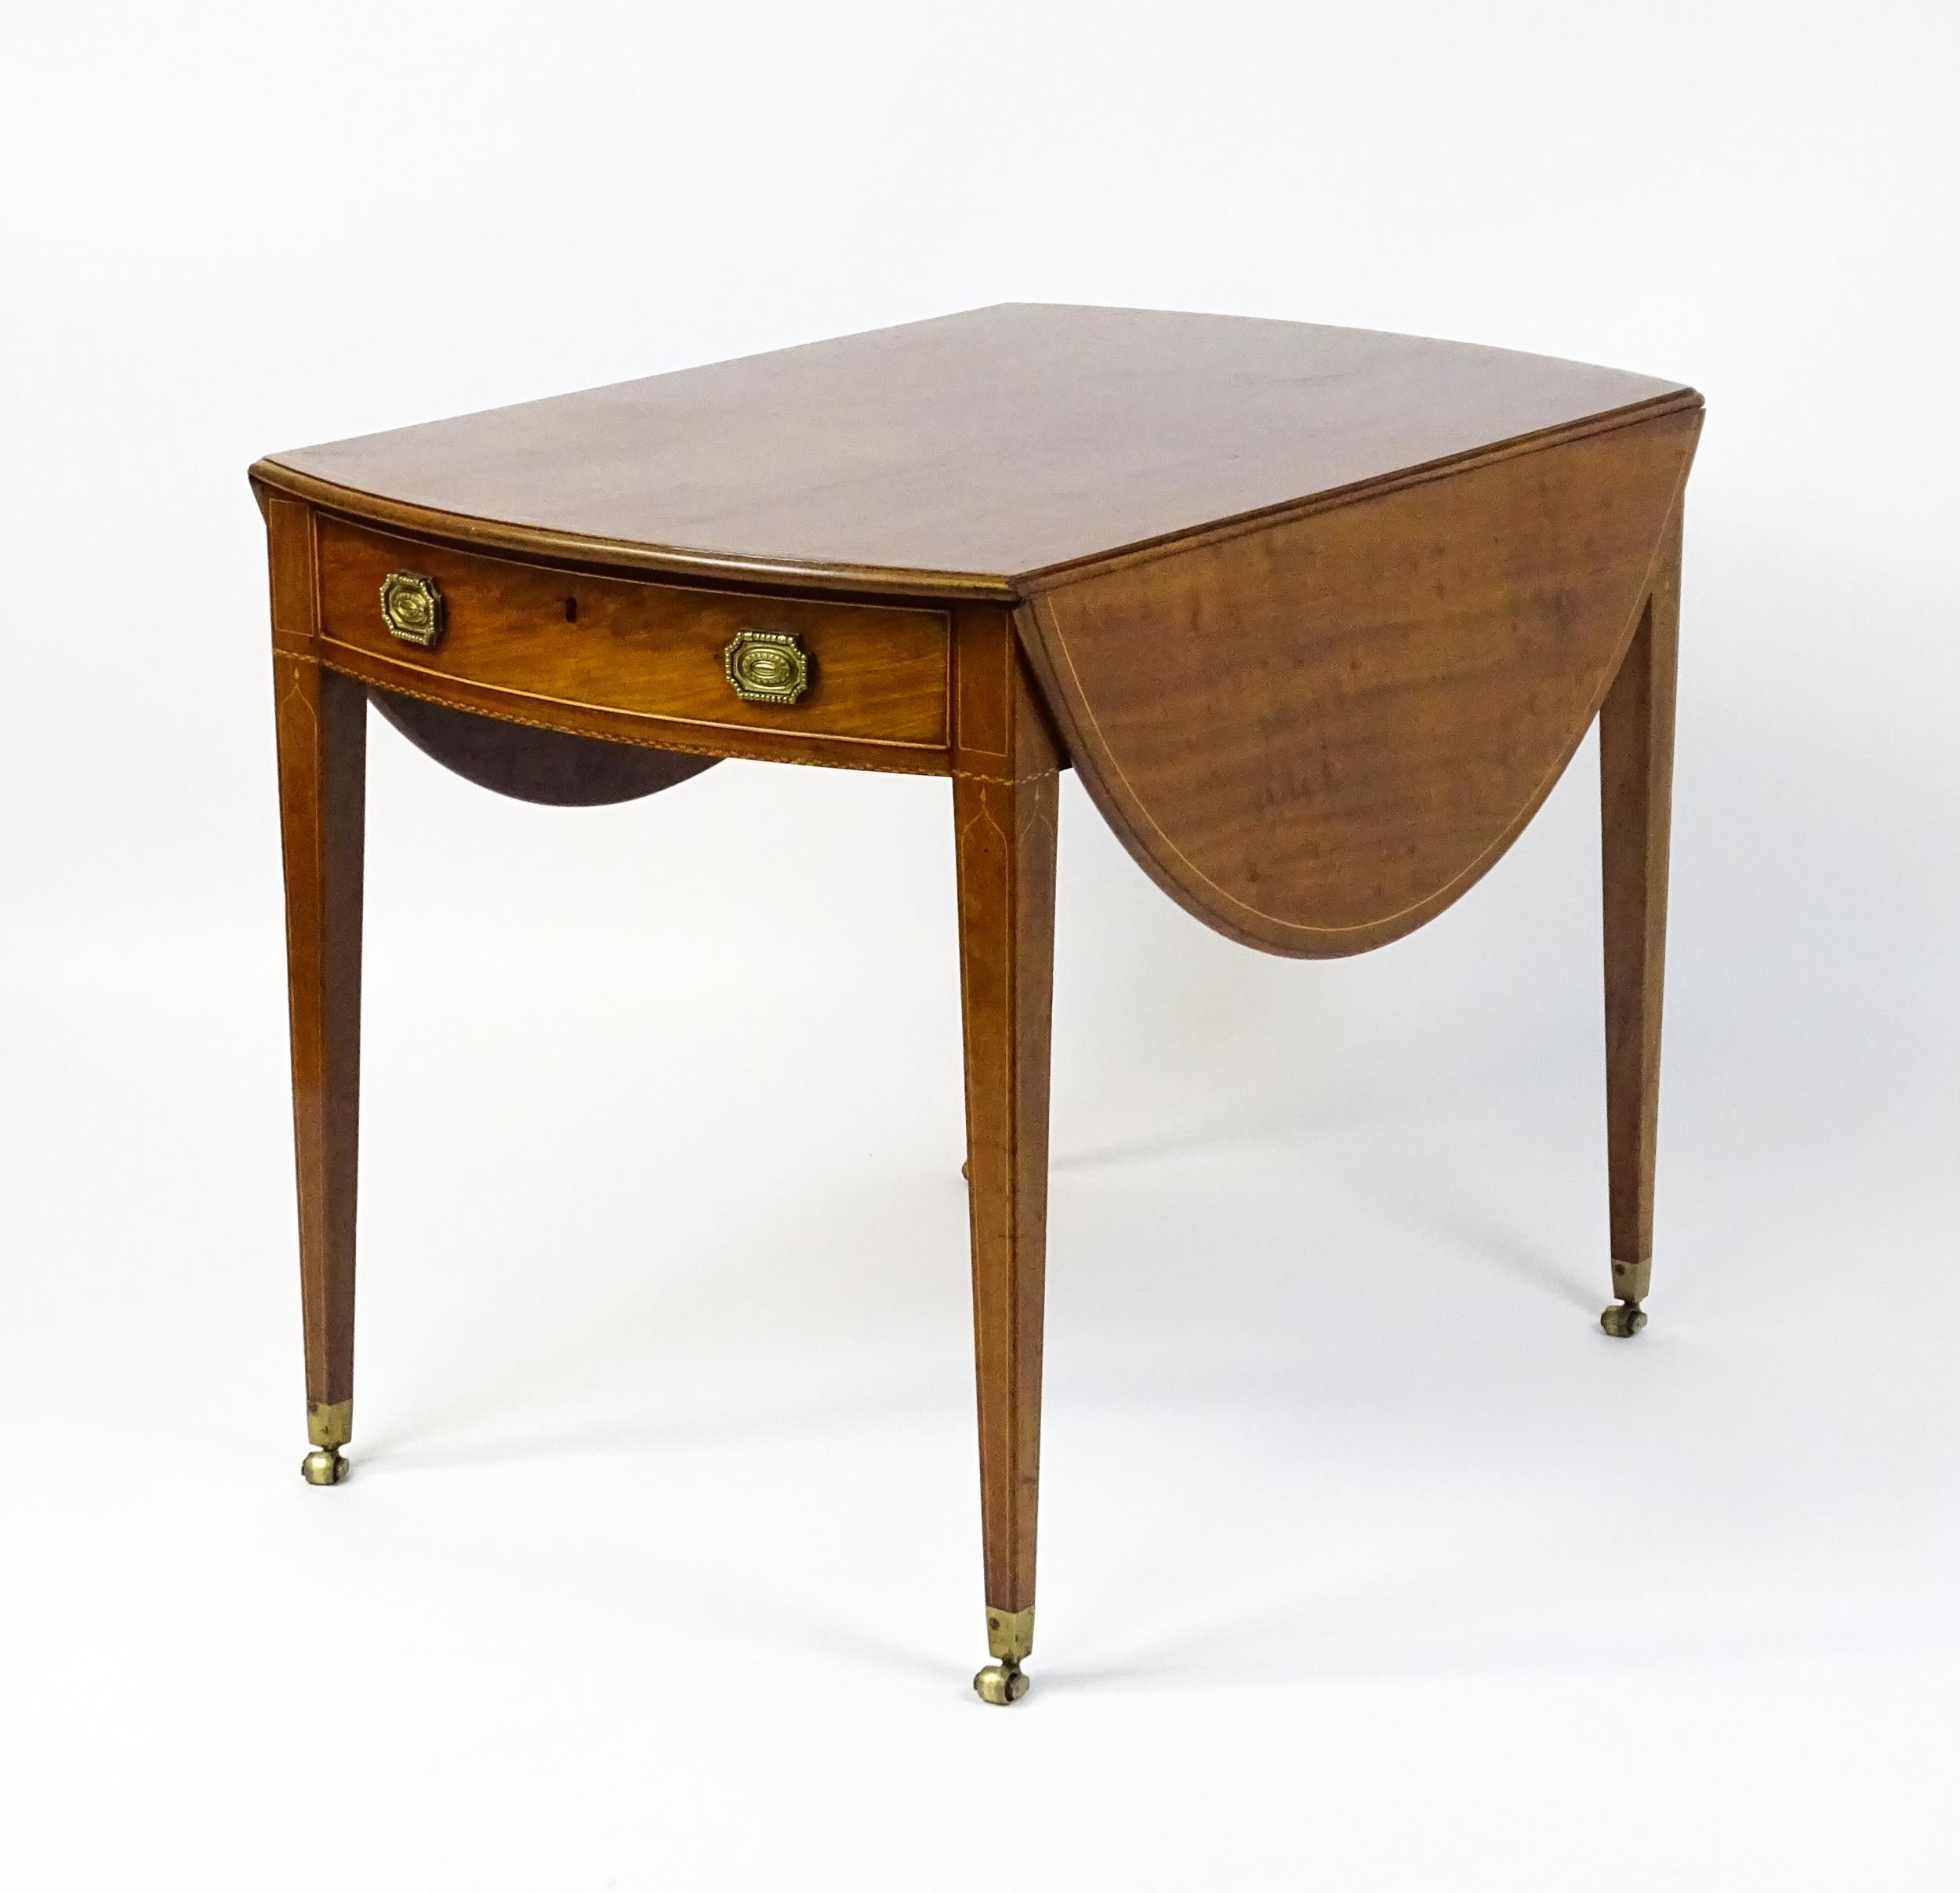 An early 19thC mahogany Pembroke table with a satinwood strung top above a single frieze drawer